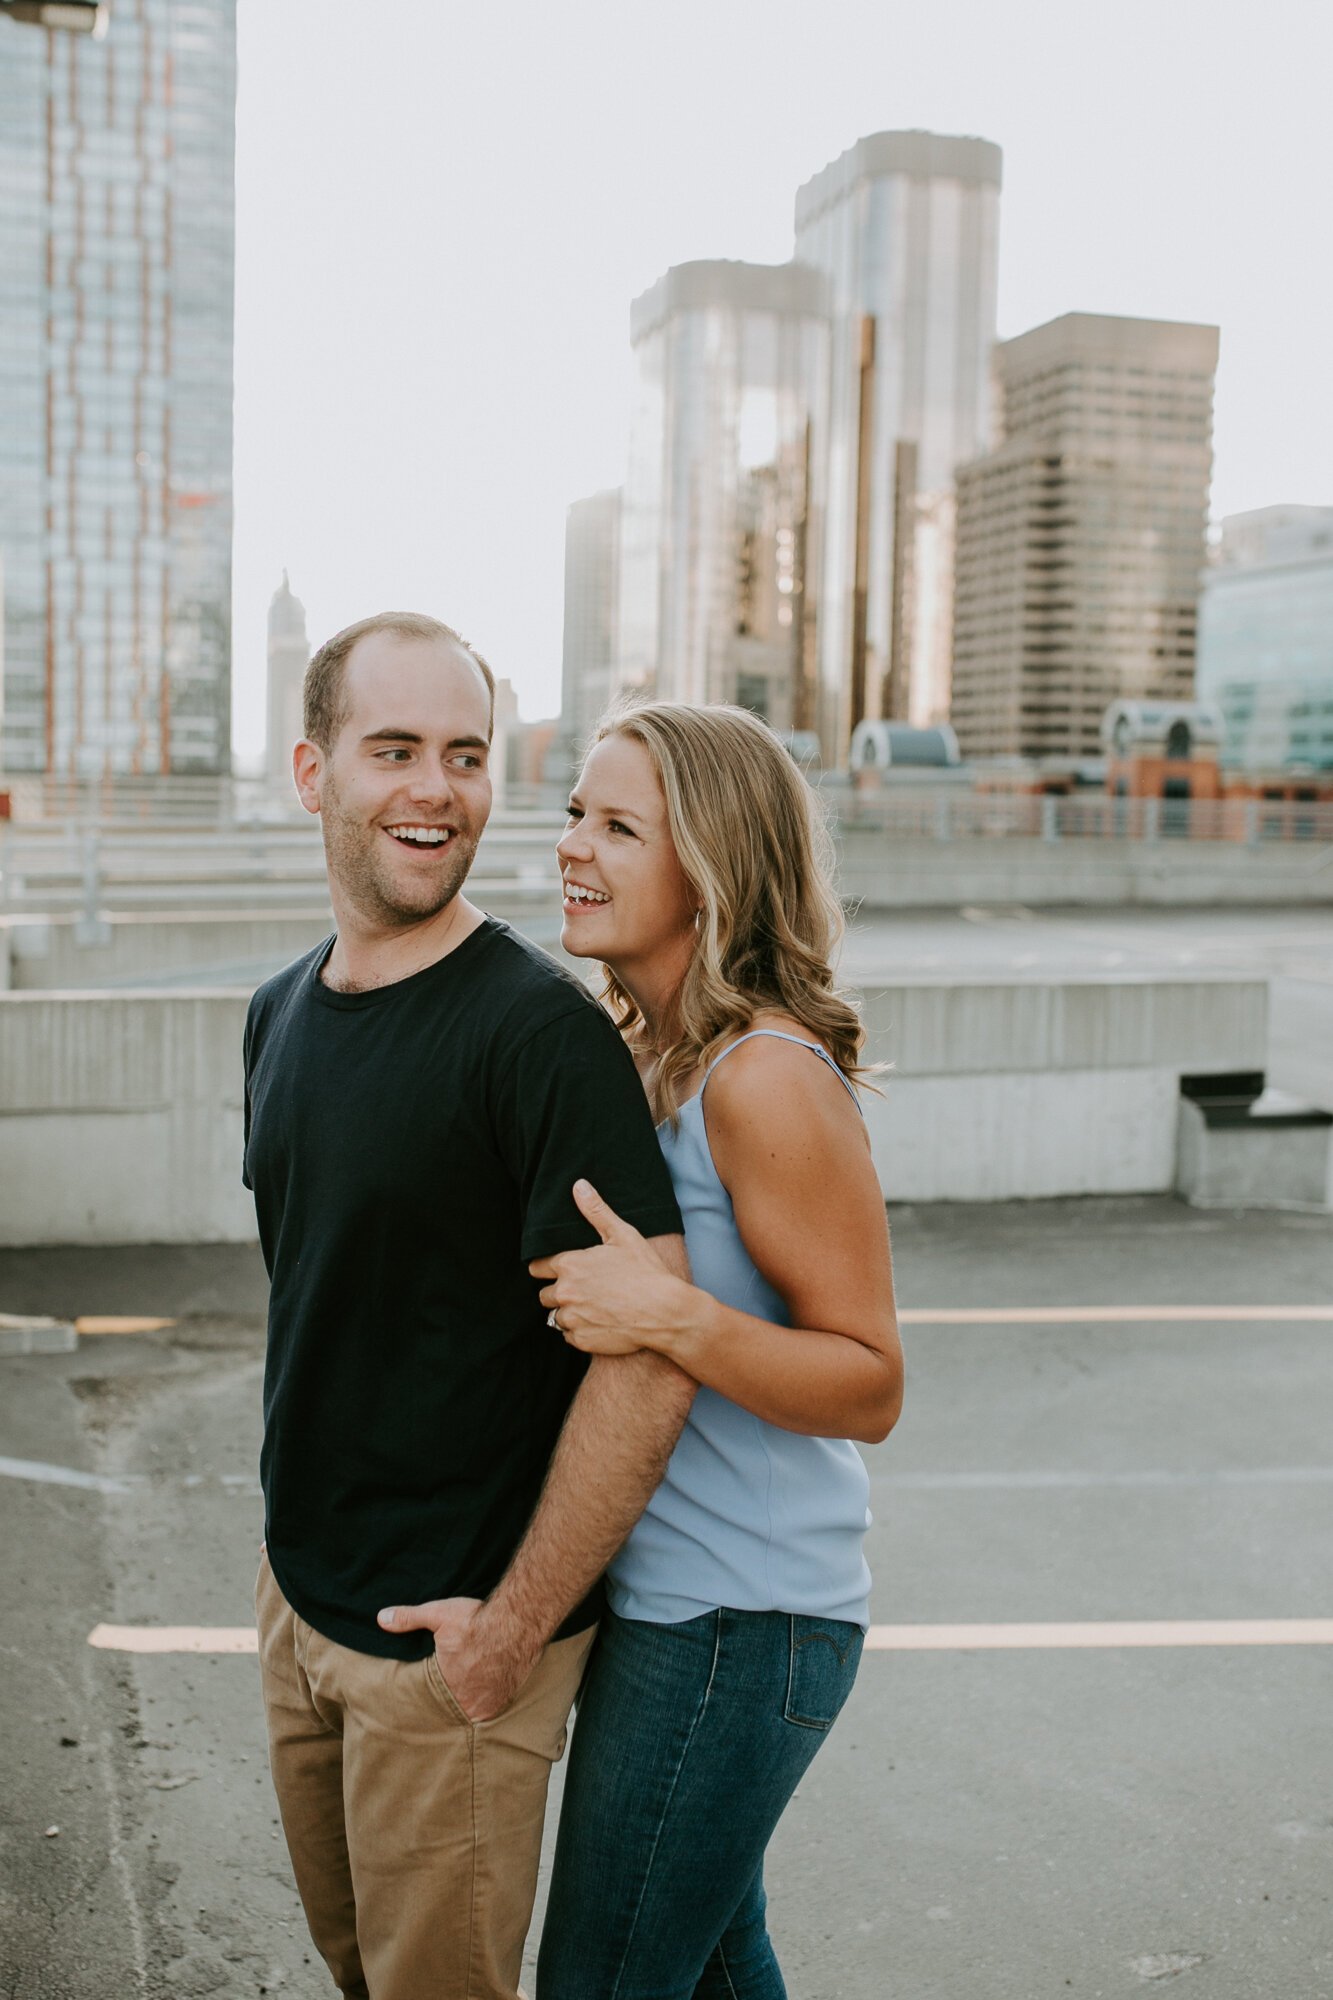  This was the first time I had gotten to see N after getting our degrees from MRU back in 2013. So not only was I pumped to get to see her and meet her fiance, we got the most beautiful golden hour light at one of my favorite downtown locations.  